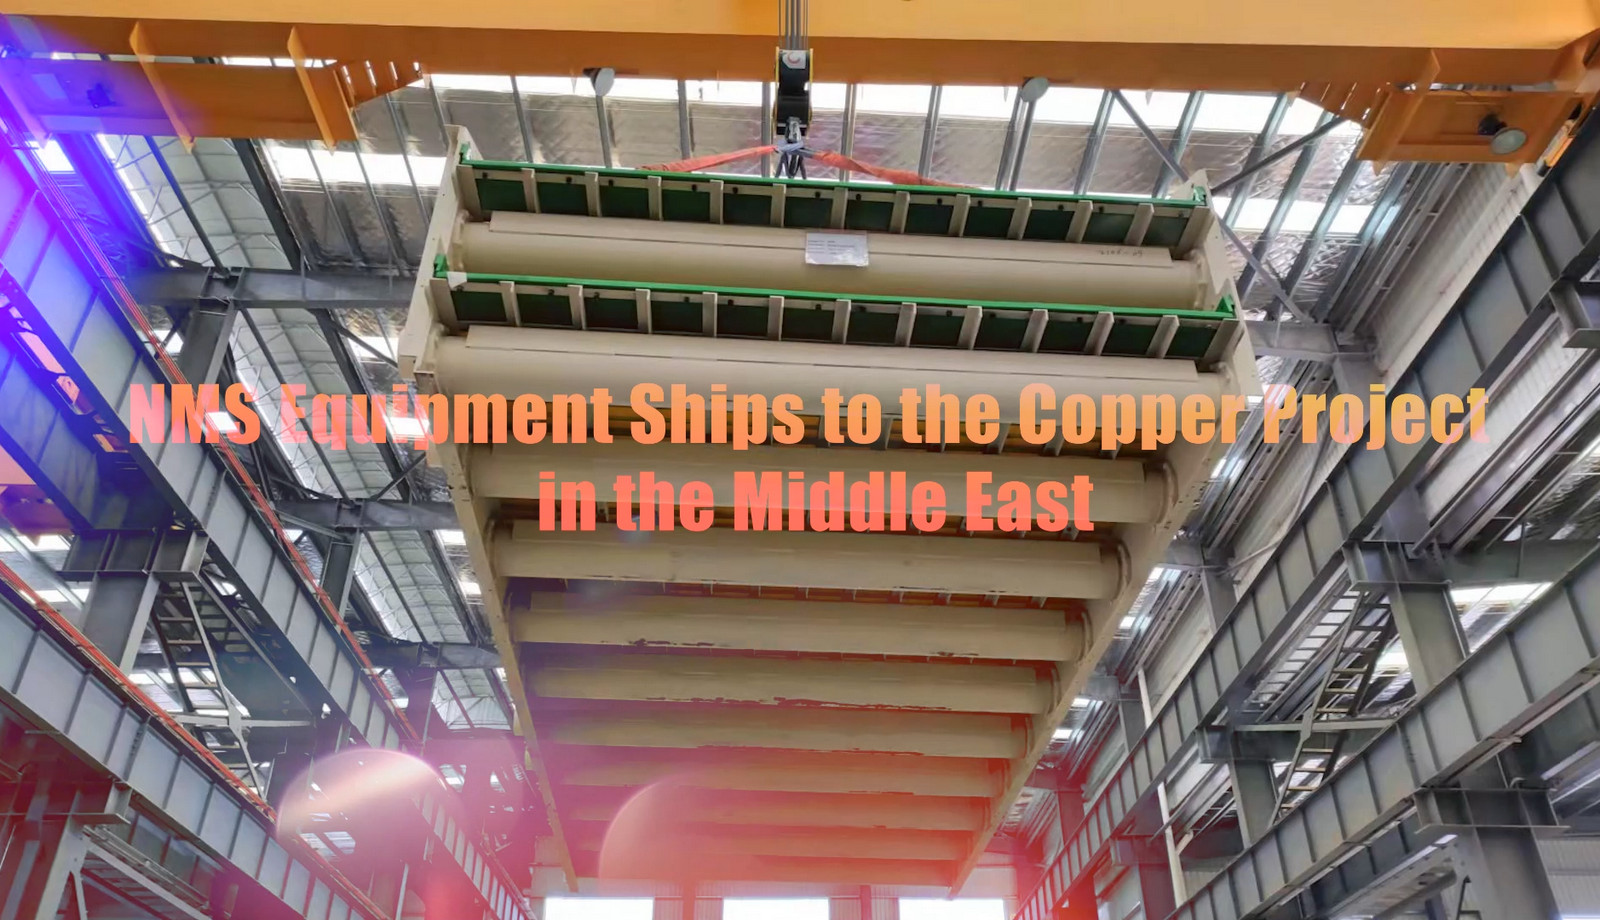 NMS Equipment Ships to the Copper Project in the Middle East